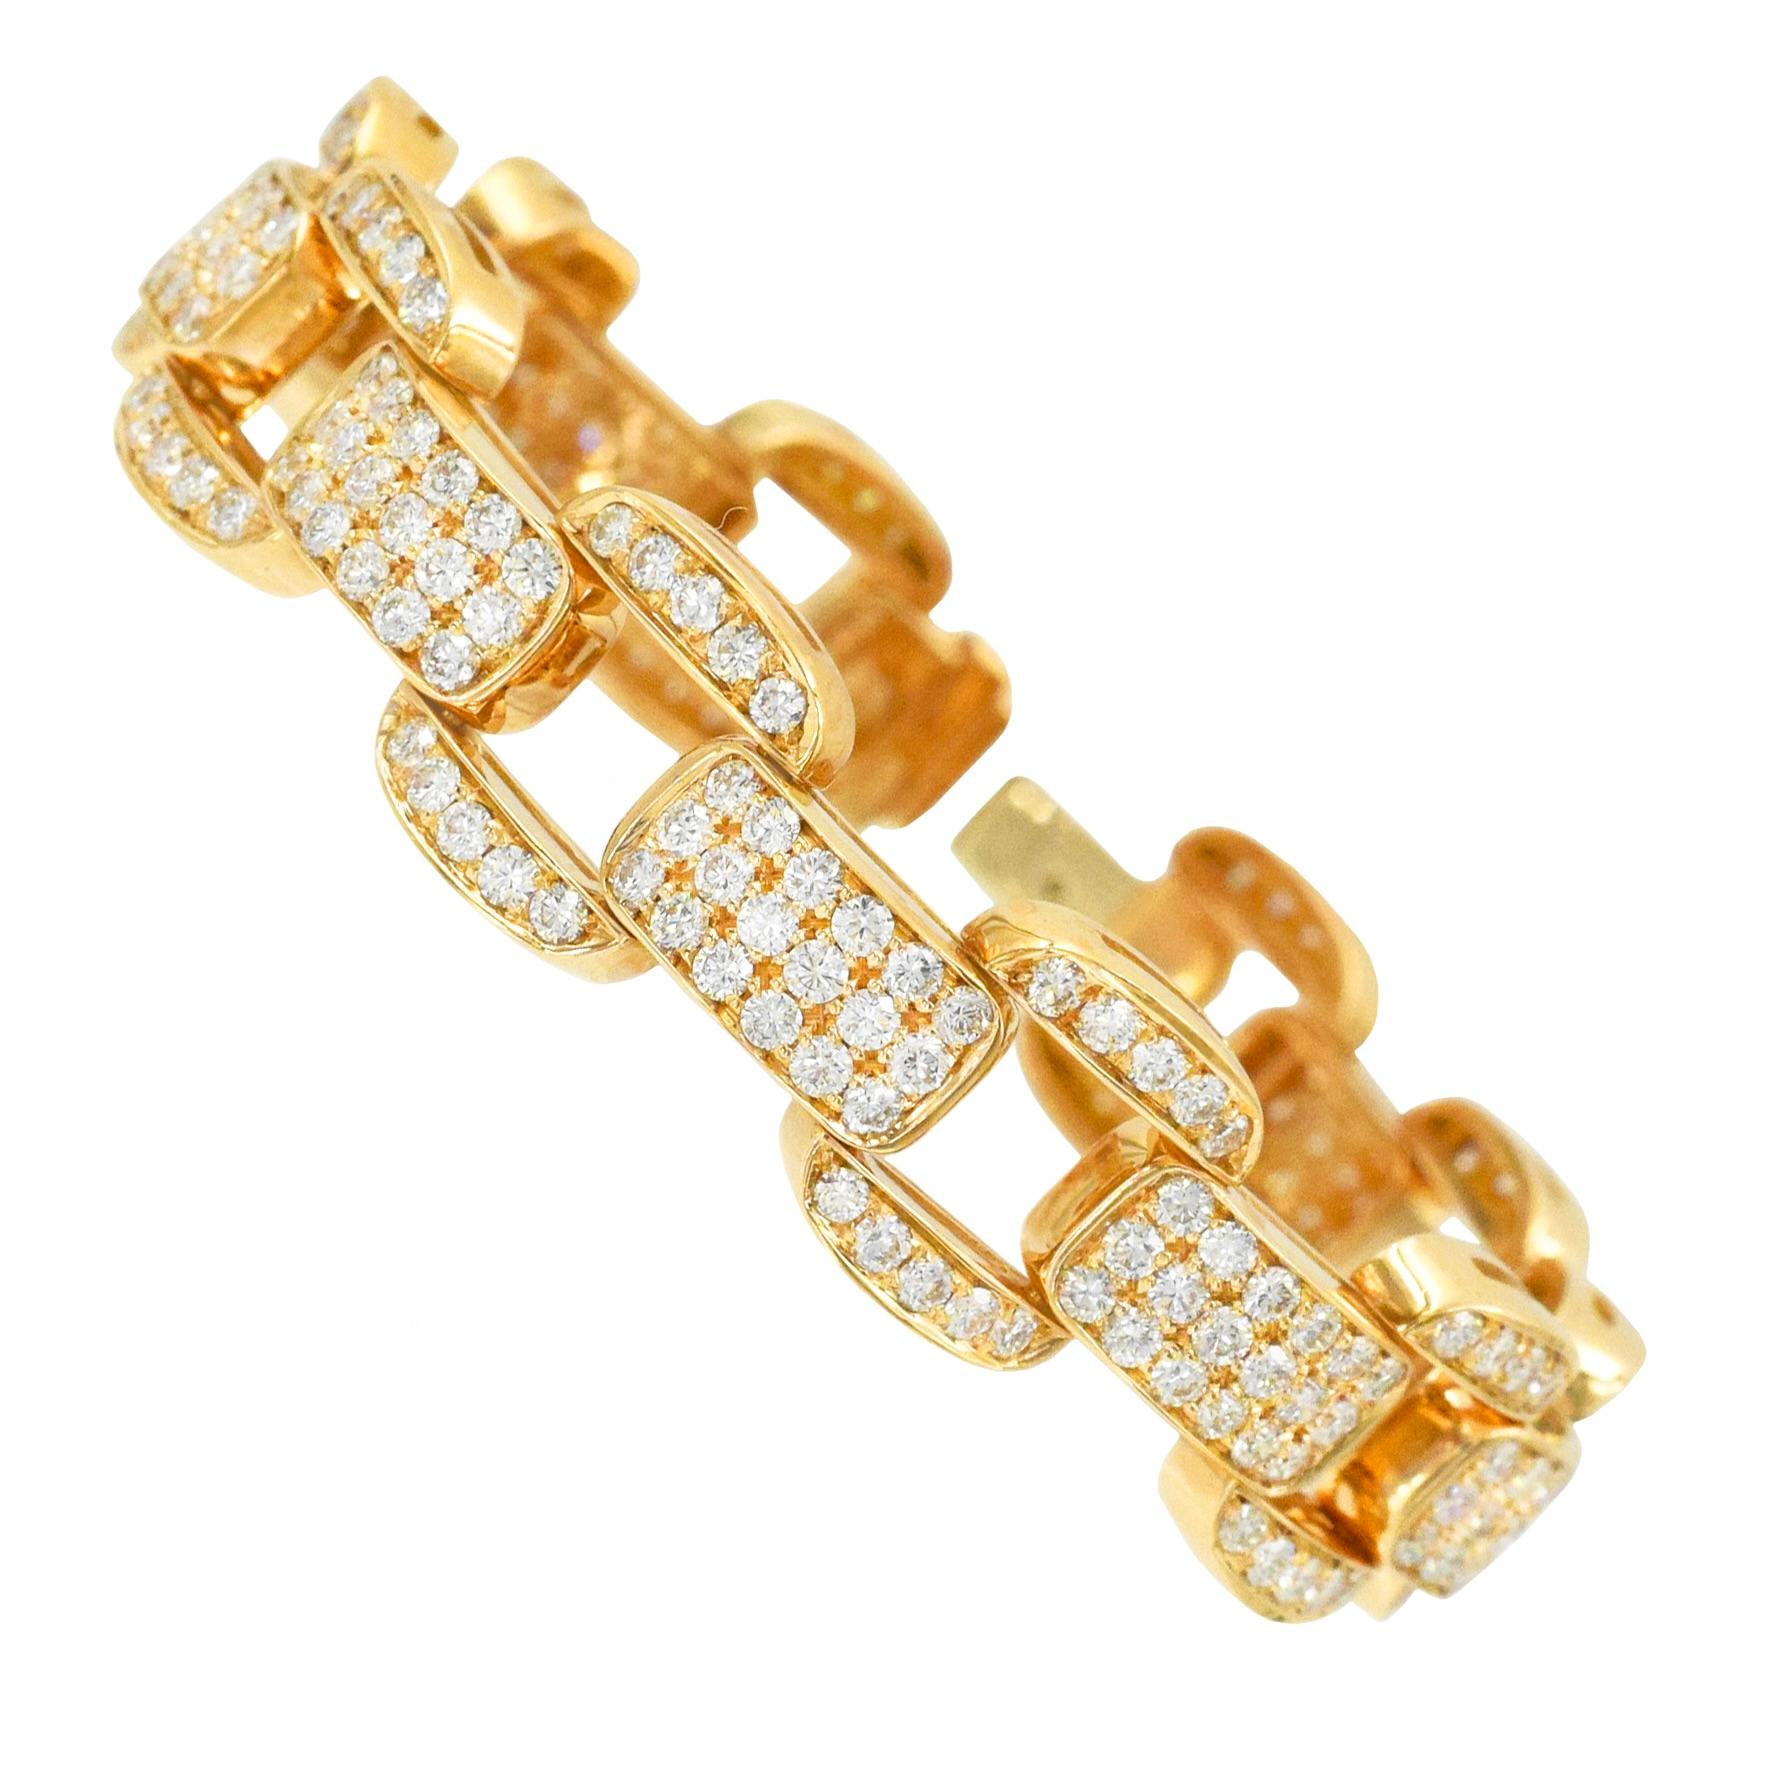 Oscar Heyman 6.86 carats diamond bracelet in 18k rose gold. The bracelet consists of 10 cushion shaped links alternating with 10 elongated links. The links are pave set with 278 of rounbrilliant
cut diamonds with a total of 6.86ct, color FG, clarity